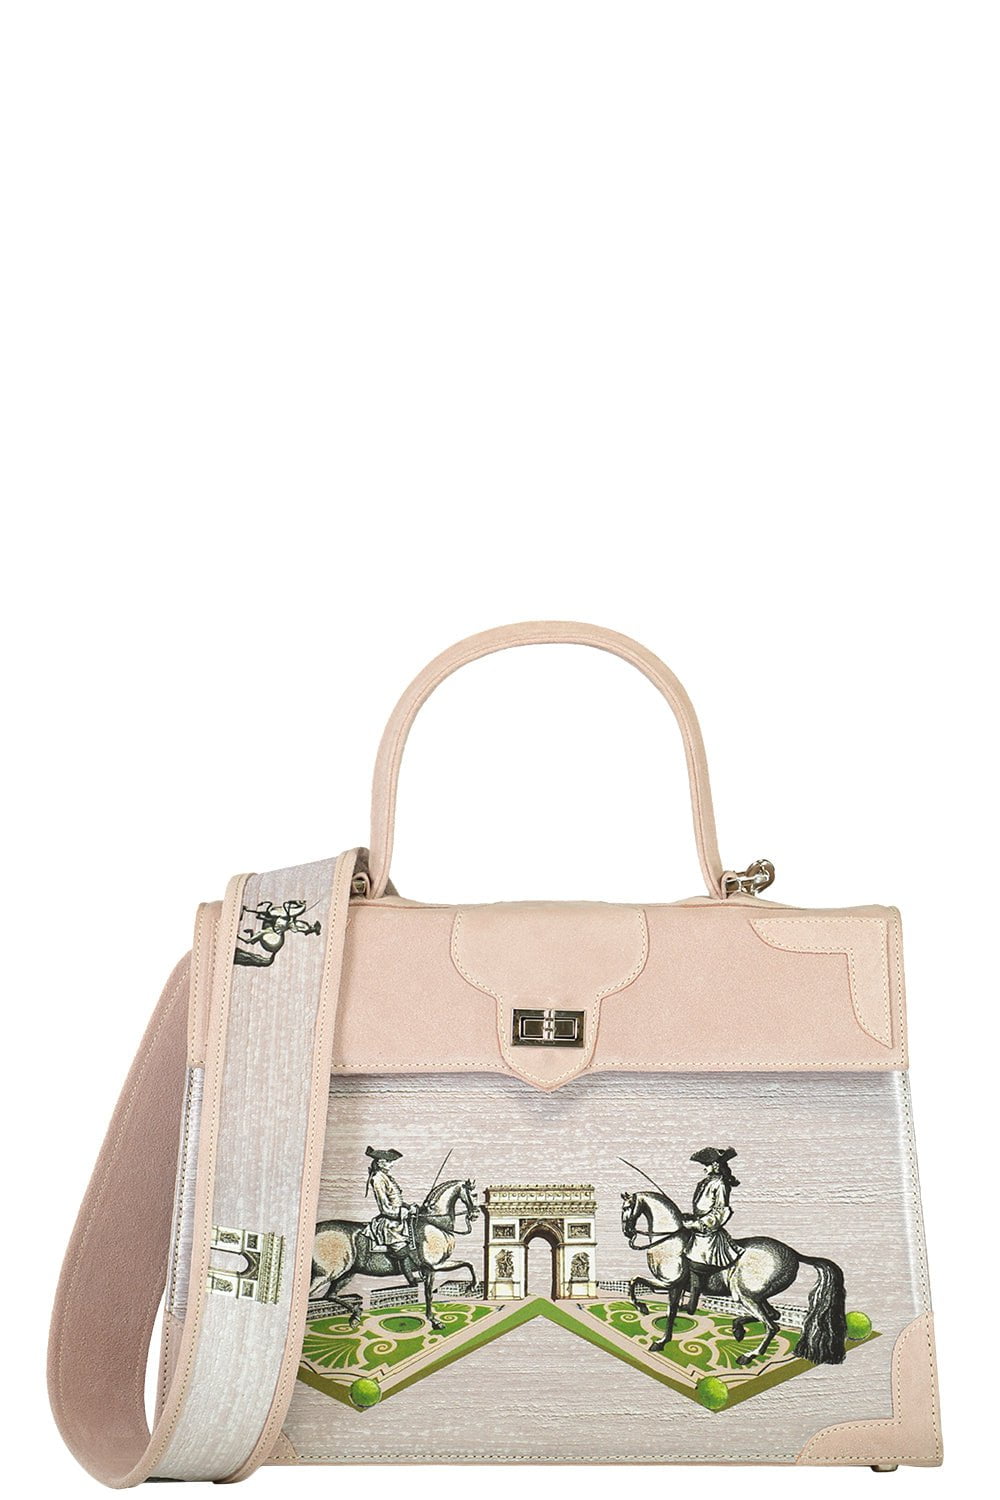 MARQUISE PARIS-Champs Elysees Top Handle Bag-CHAMPAGNE ROSE